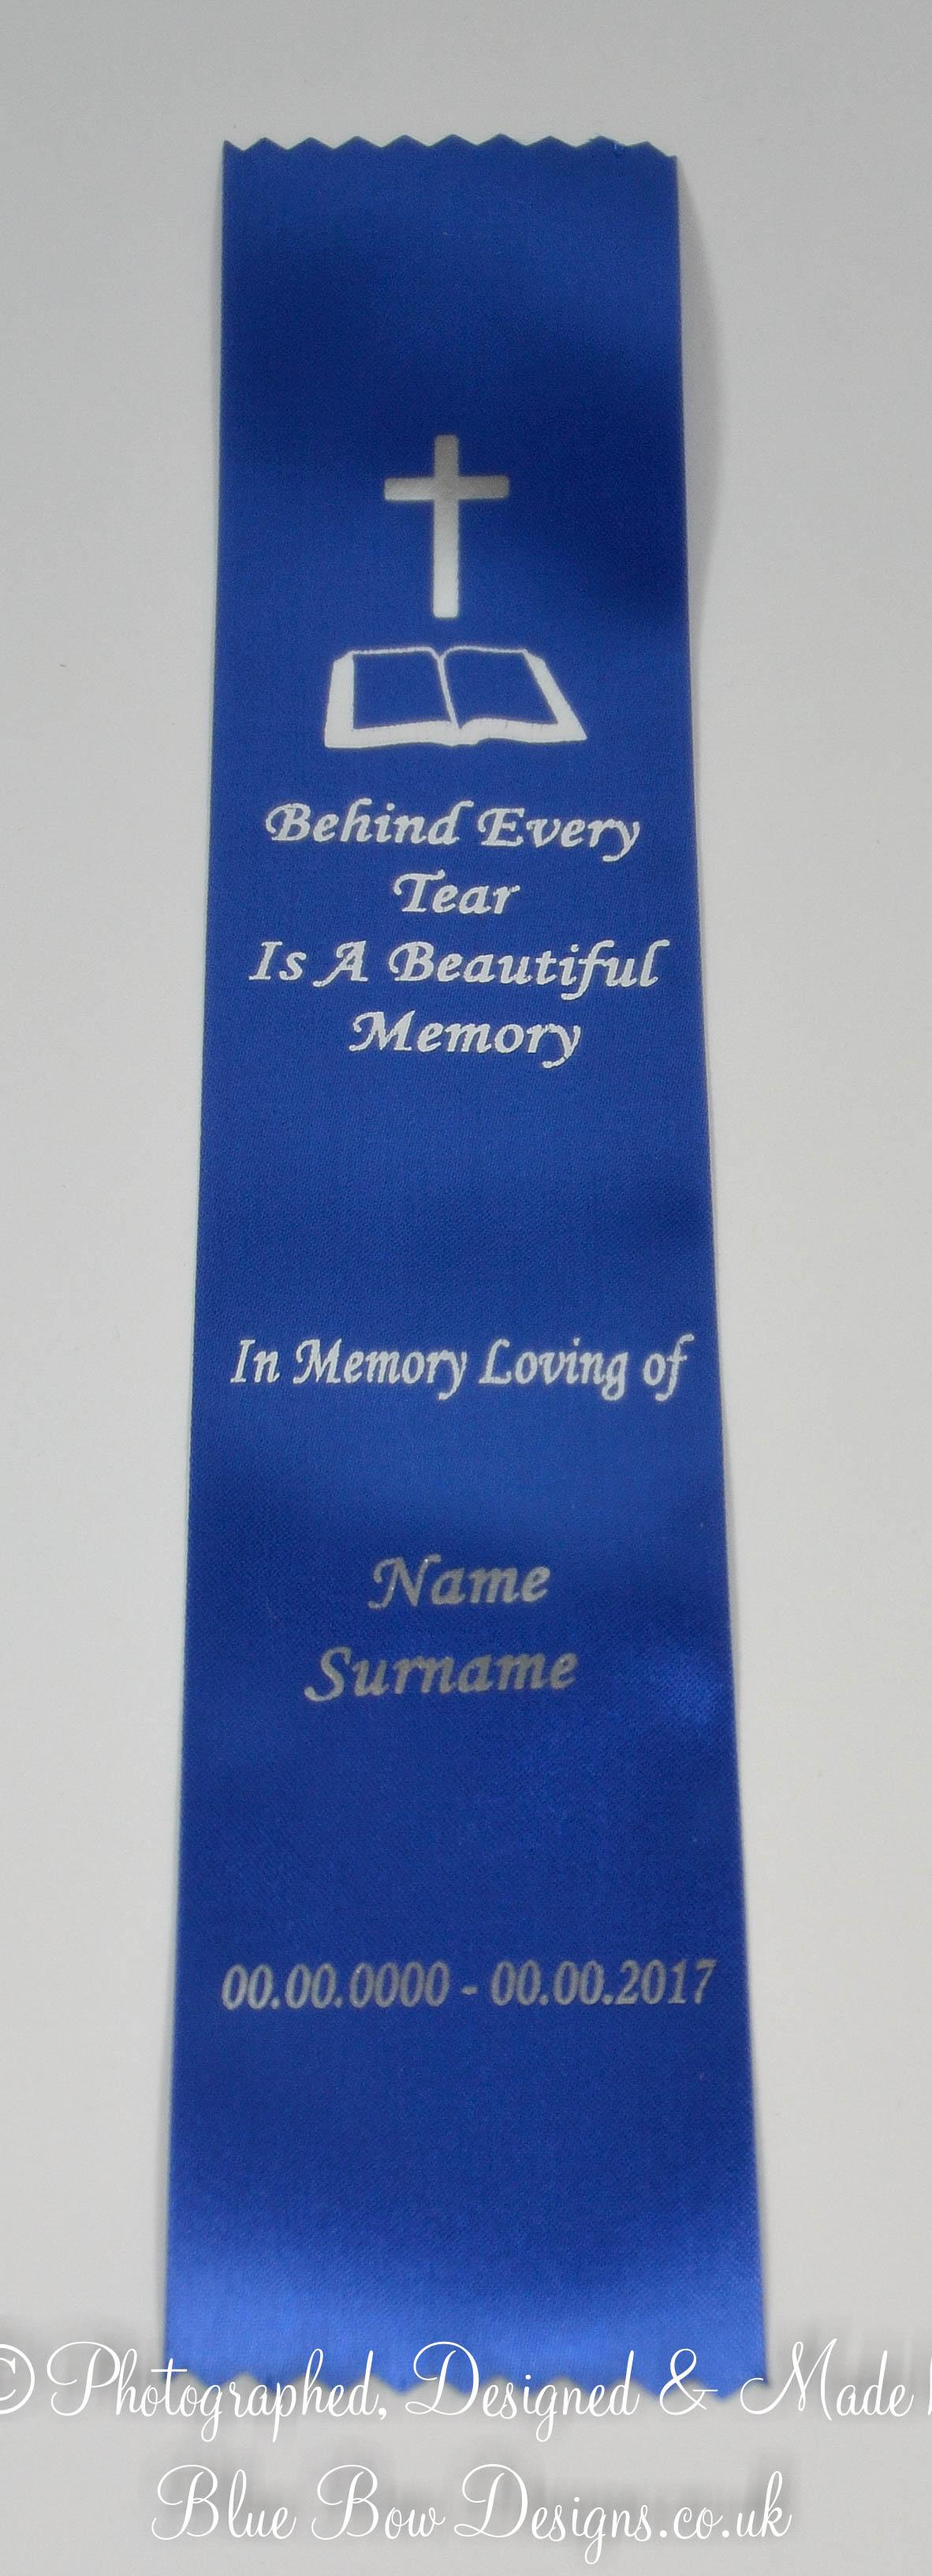 Royal blue and silver personalised funeral bookmark